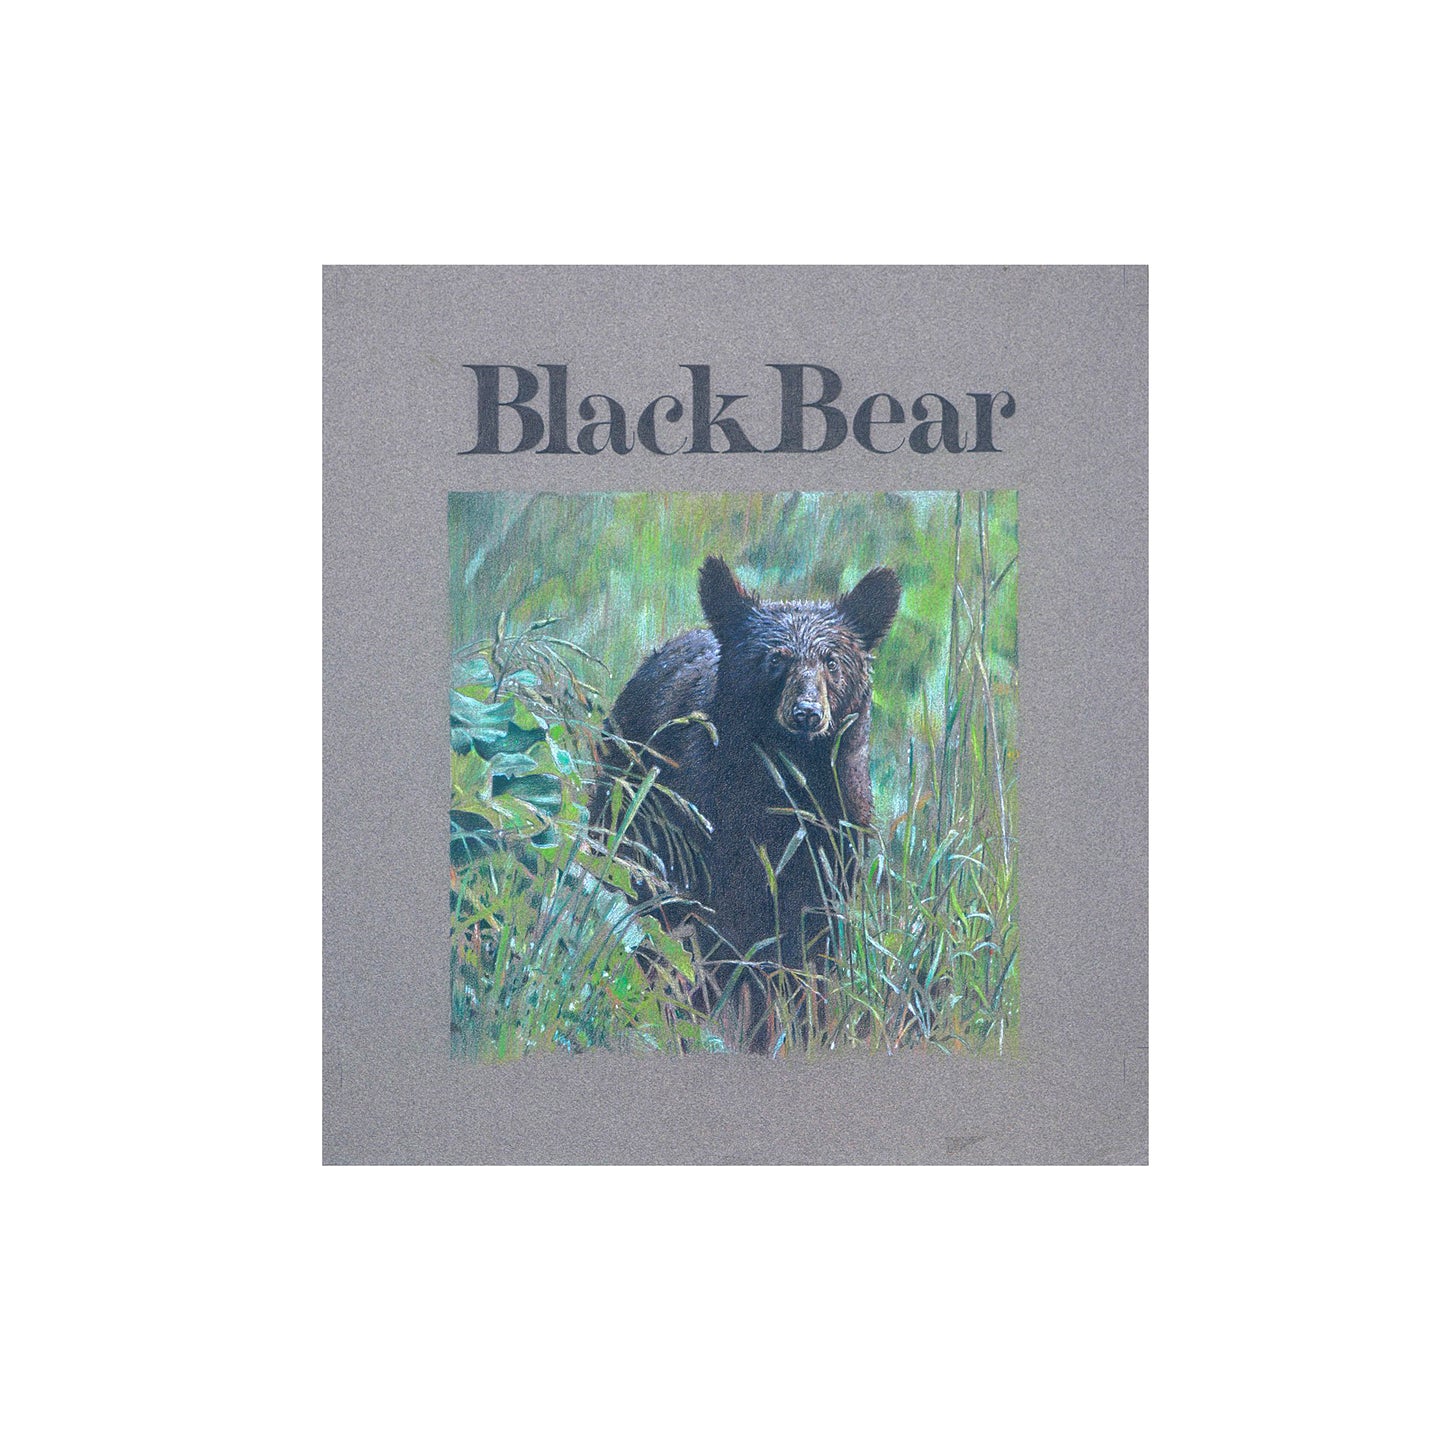 Black Bear cover drawing, Great Smoky Mountain National Park, Tennessee